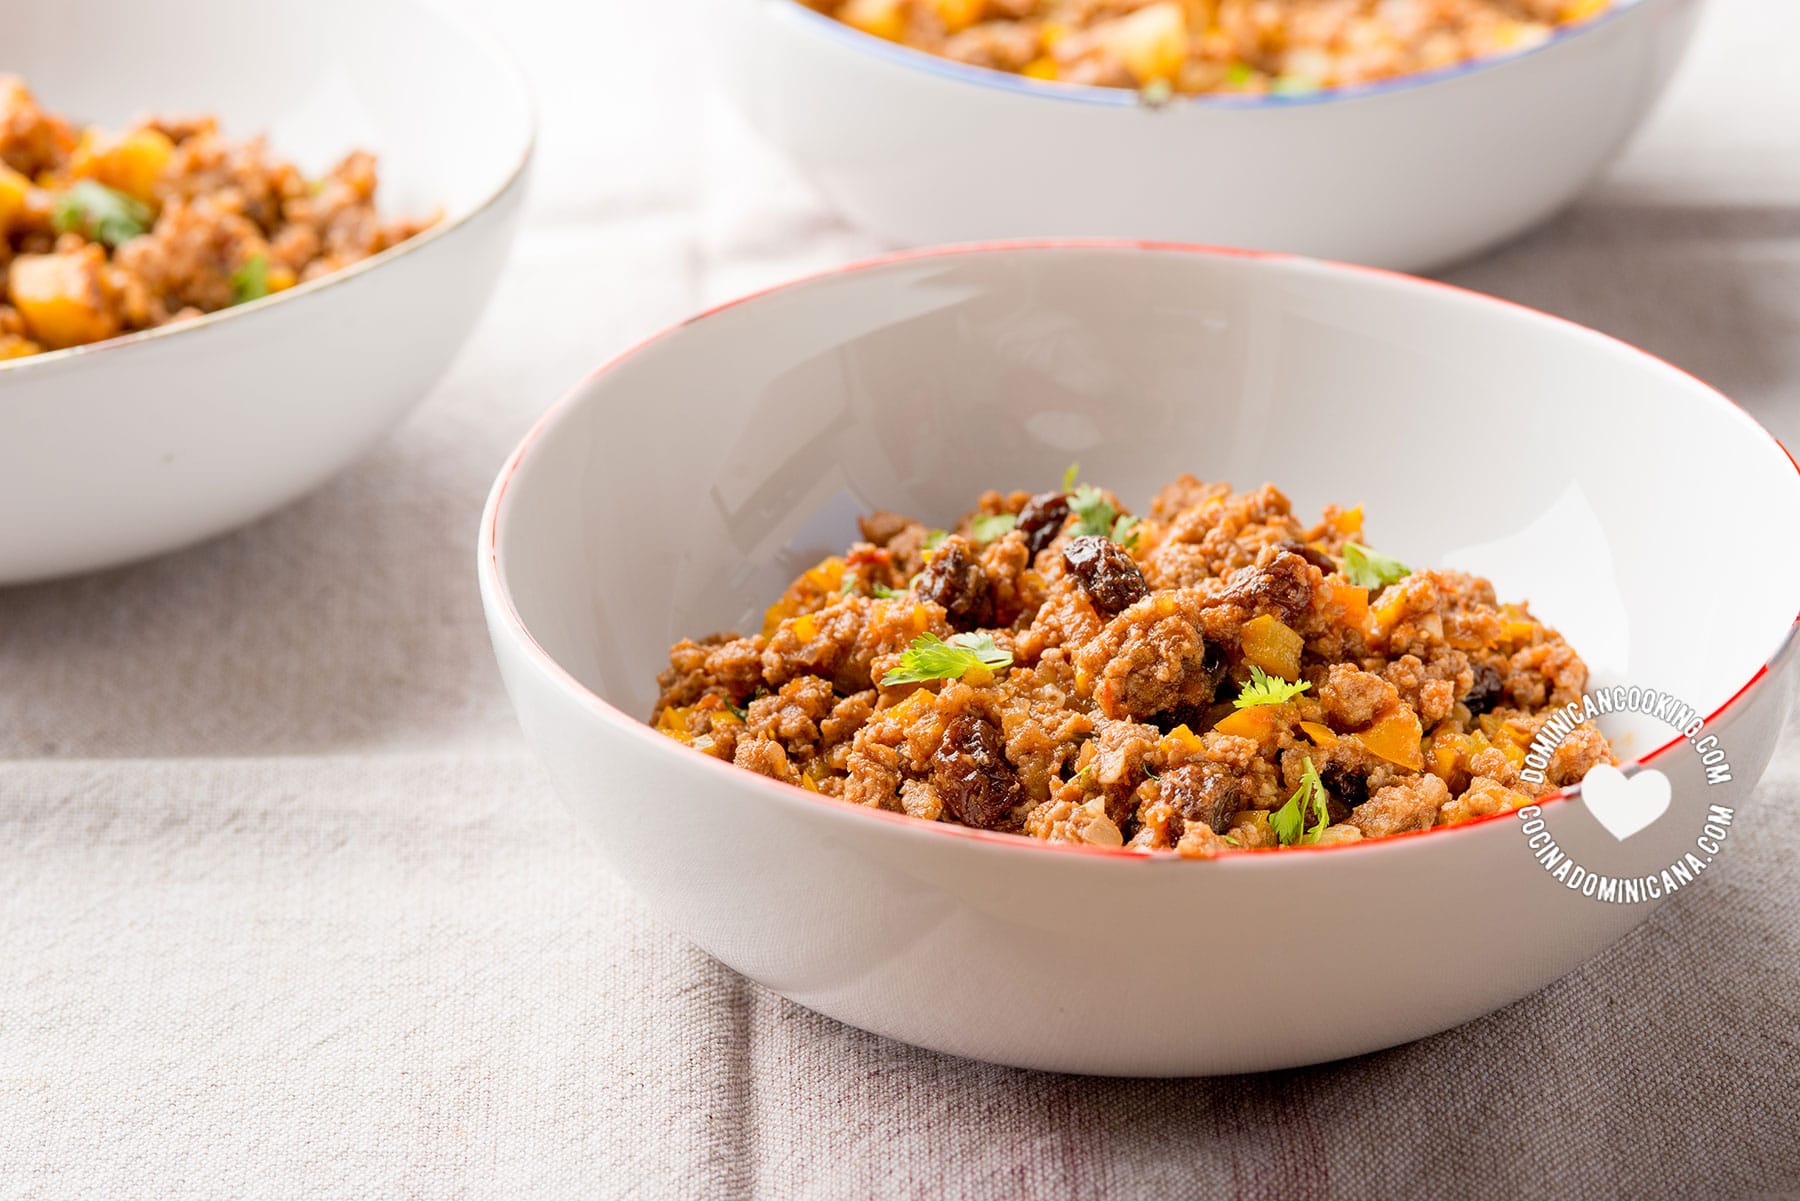 Minced beef and raisins stuffing